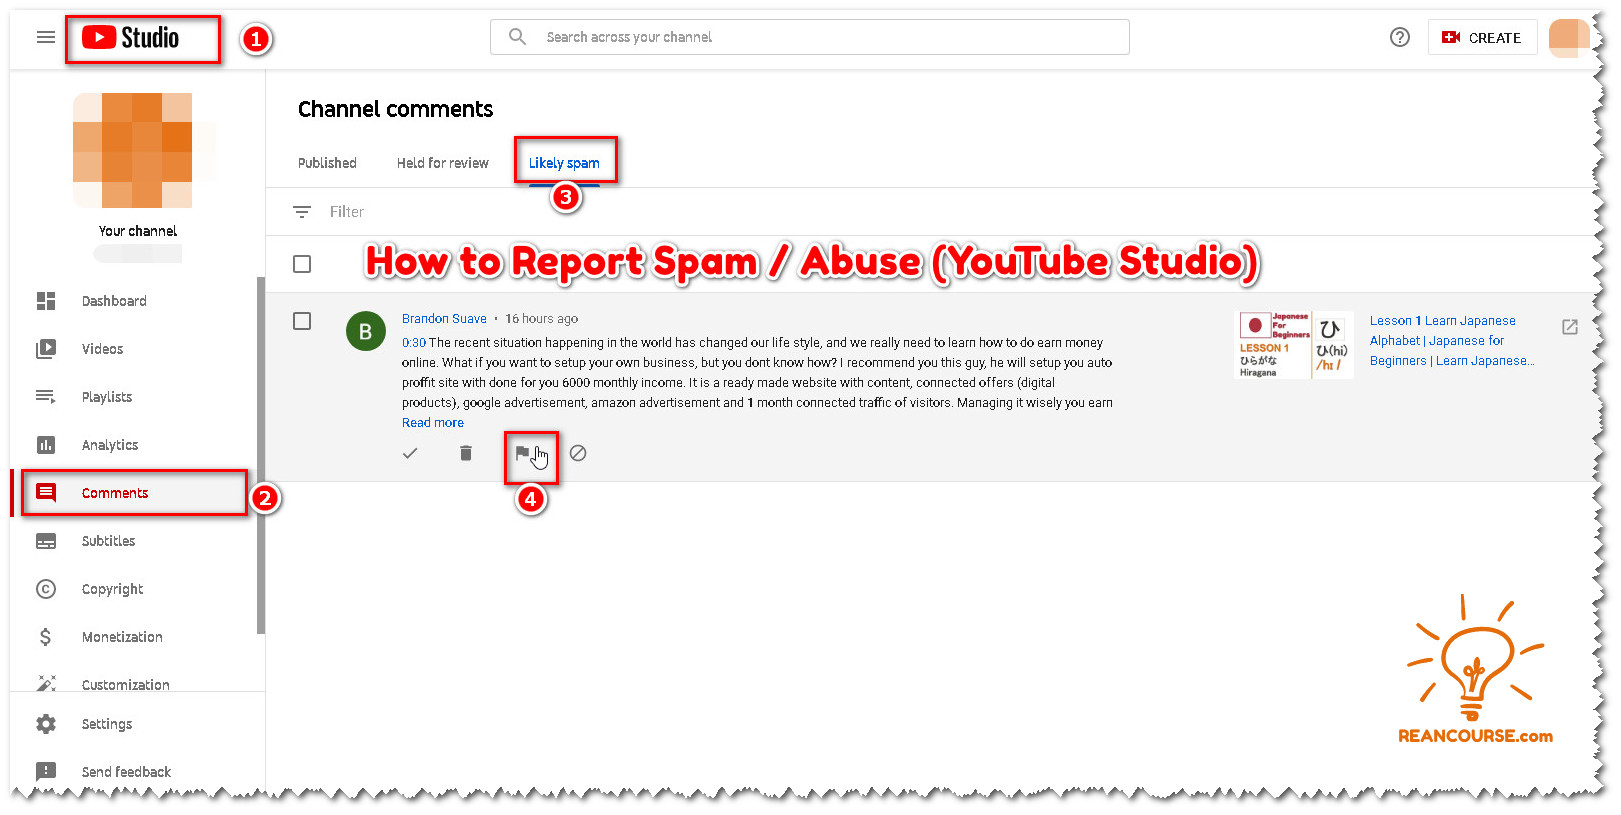 How to Report Spam on YouTube Studio with Instruction